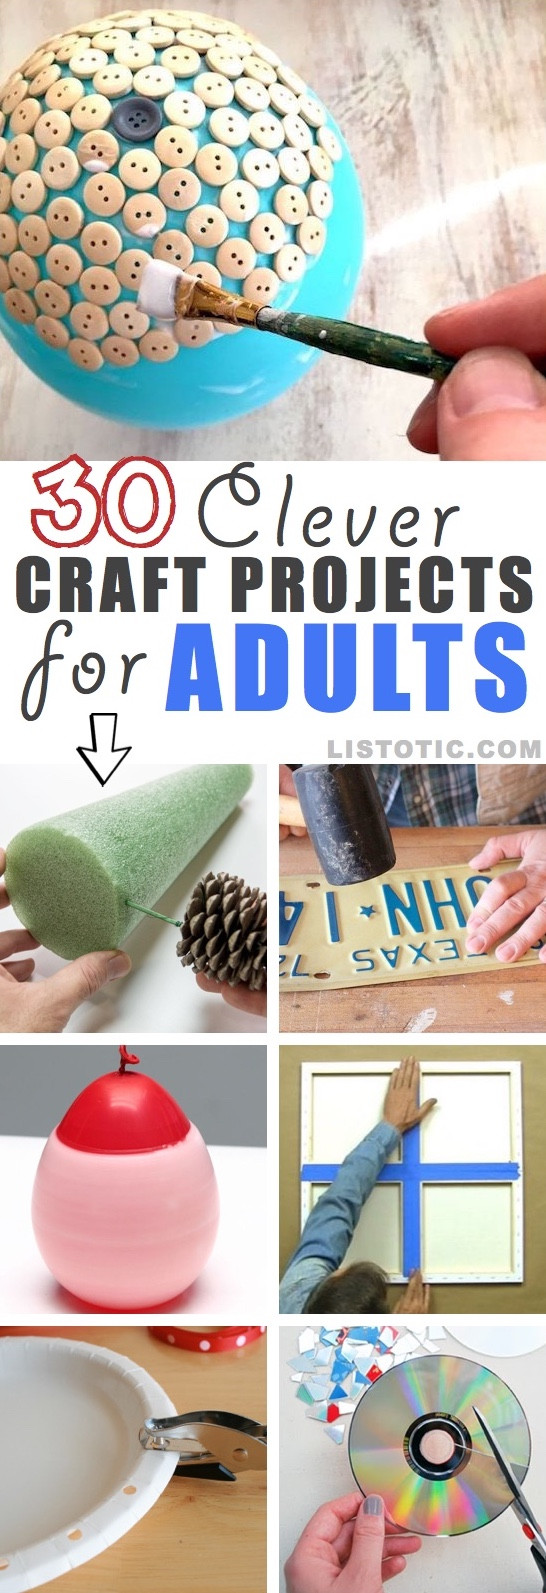 Cool Crafts For Adults
 30 Easy Craft Ideas That Will Spark Your Creativity DIY